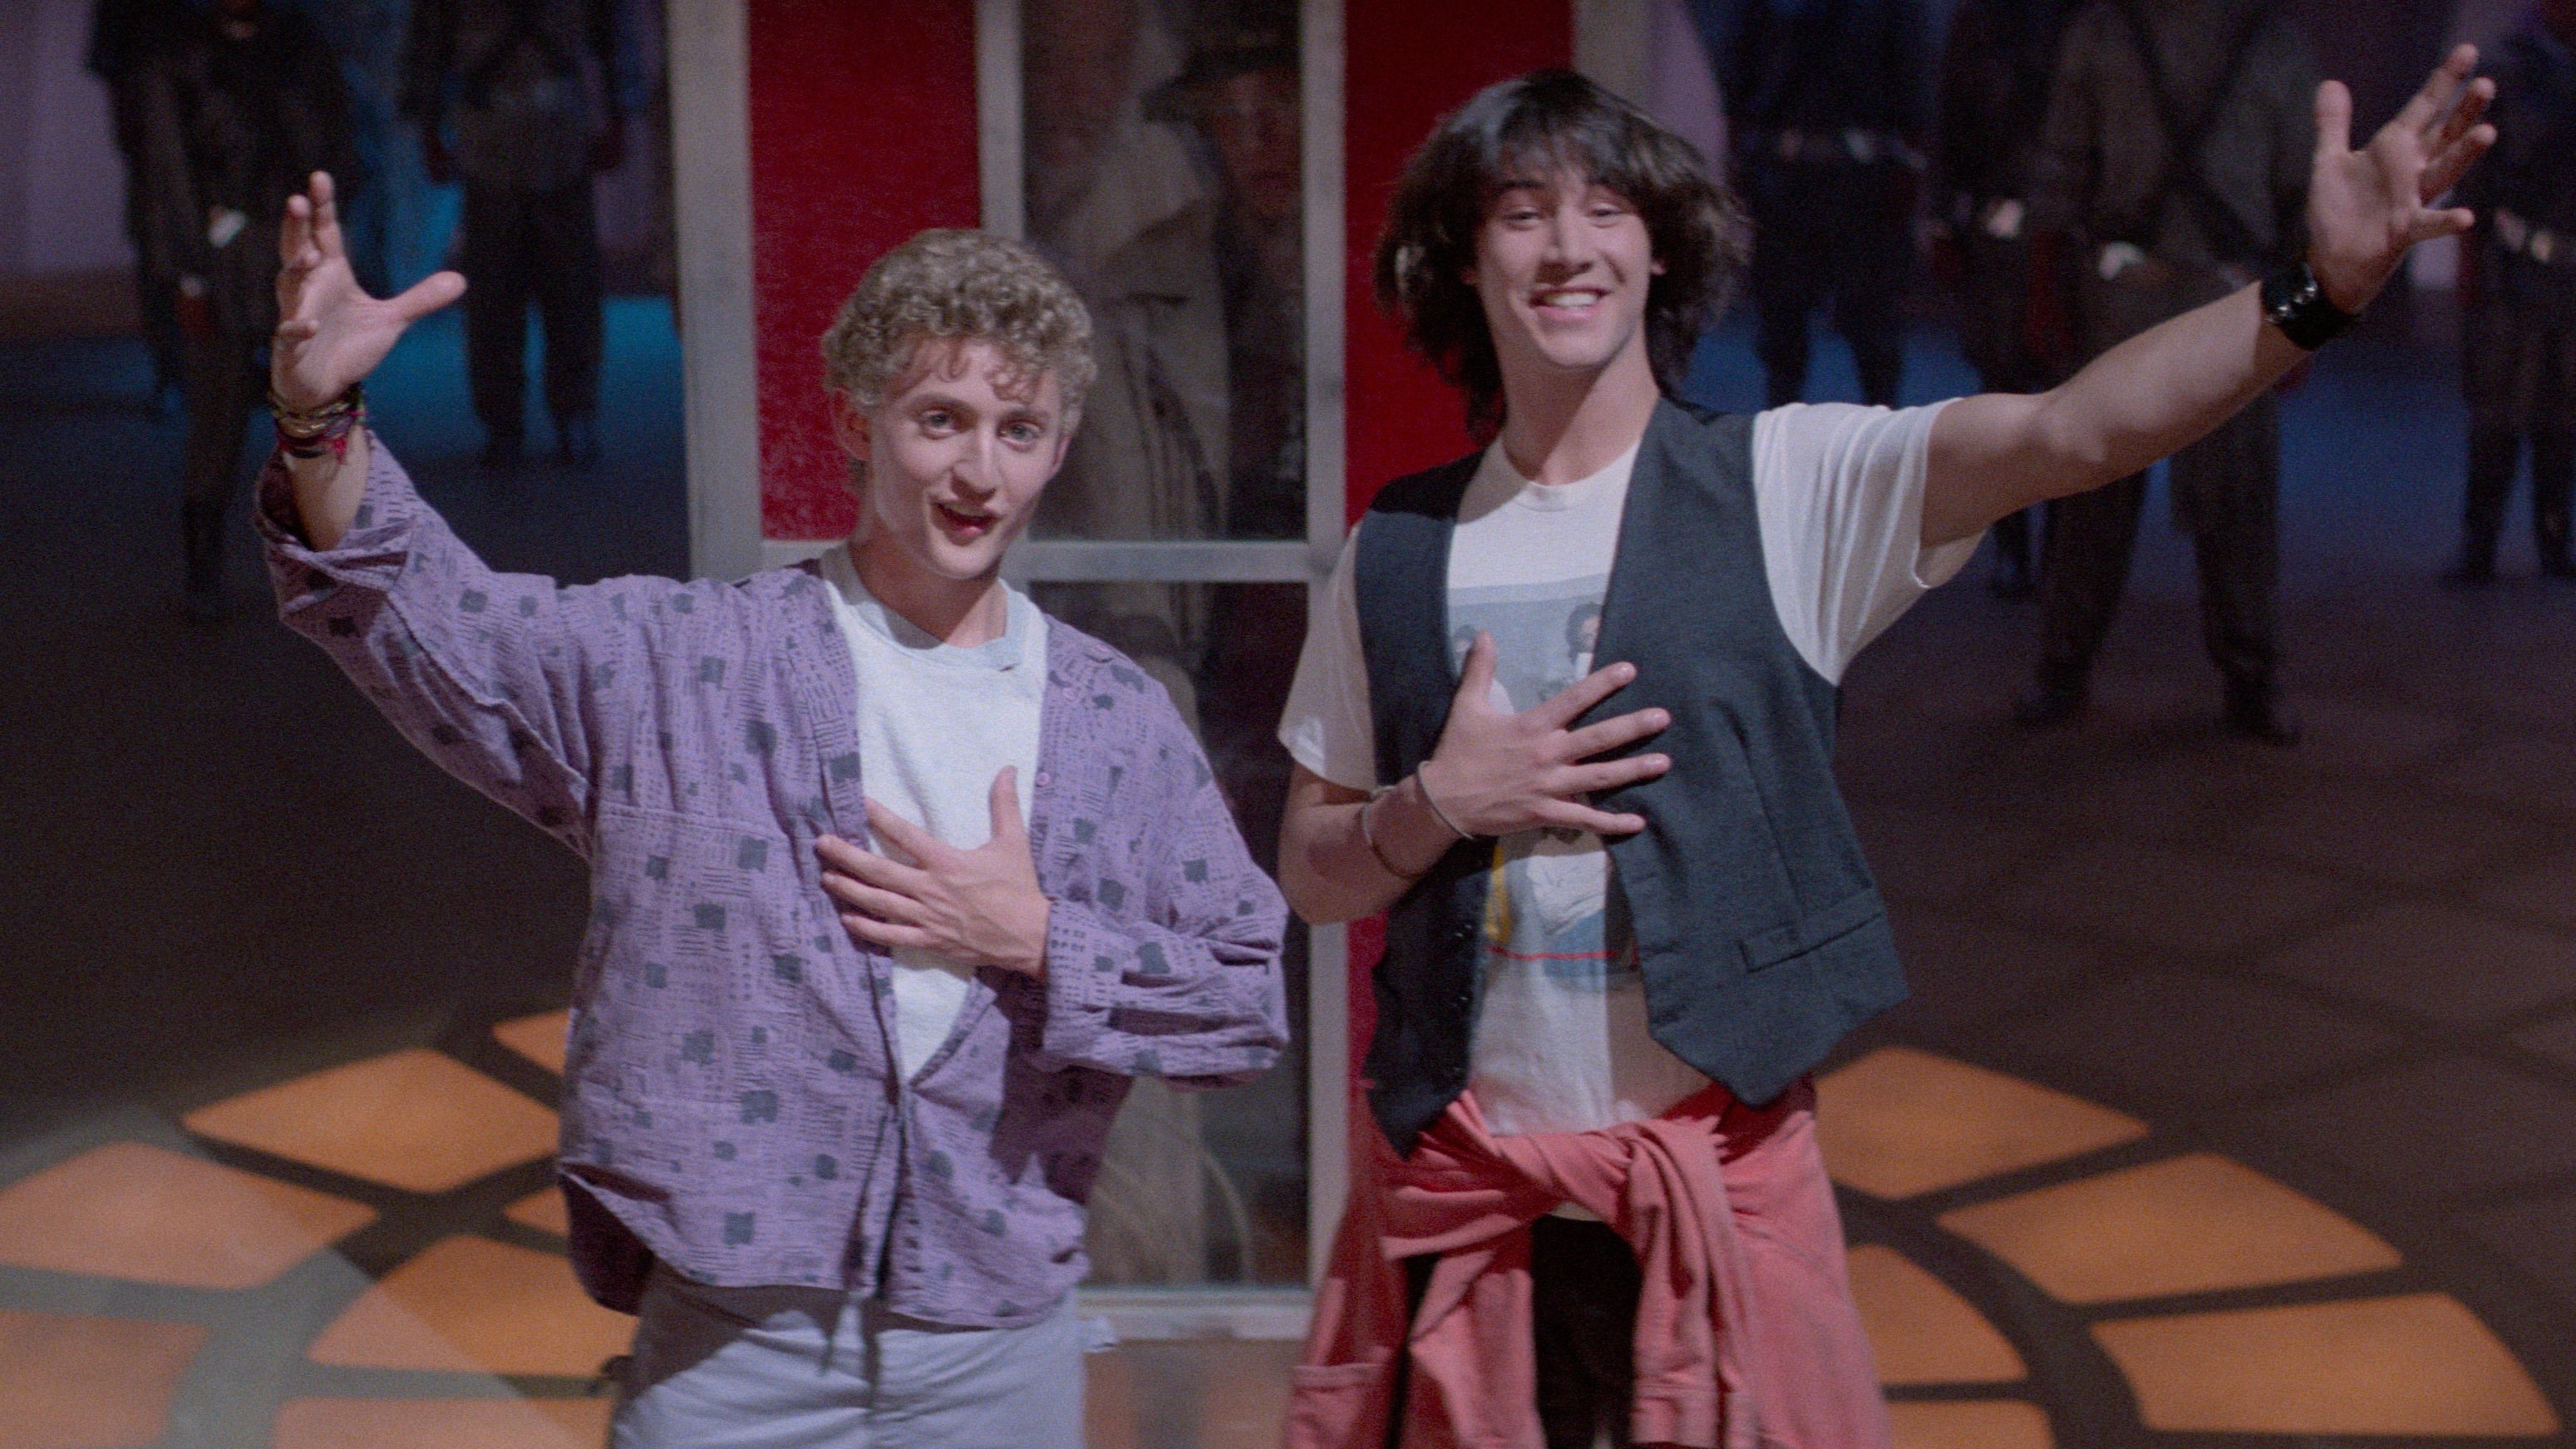 Bill & Ted’s Excellent Adventure 1989 123movies